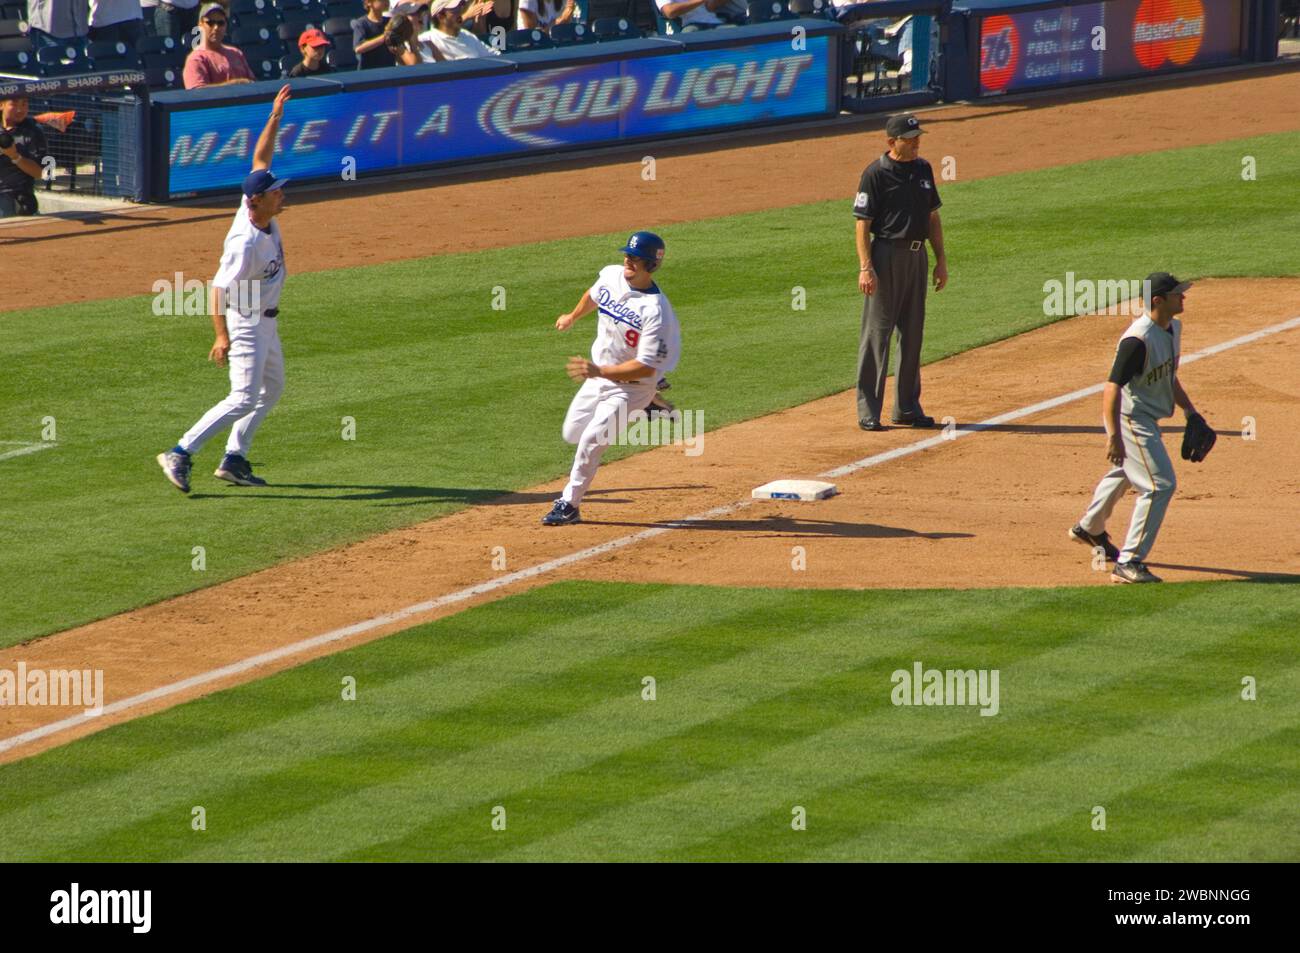 A baserunner rounding third base and heading for home to score a run in a Major League game at Dodger Stadium in Los Angeles, California, USA Stock Photo